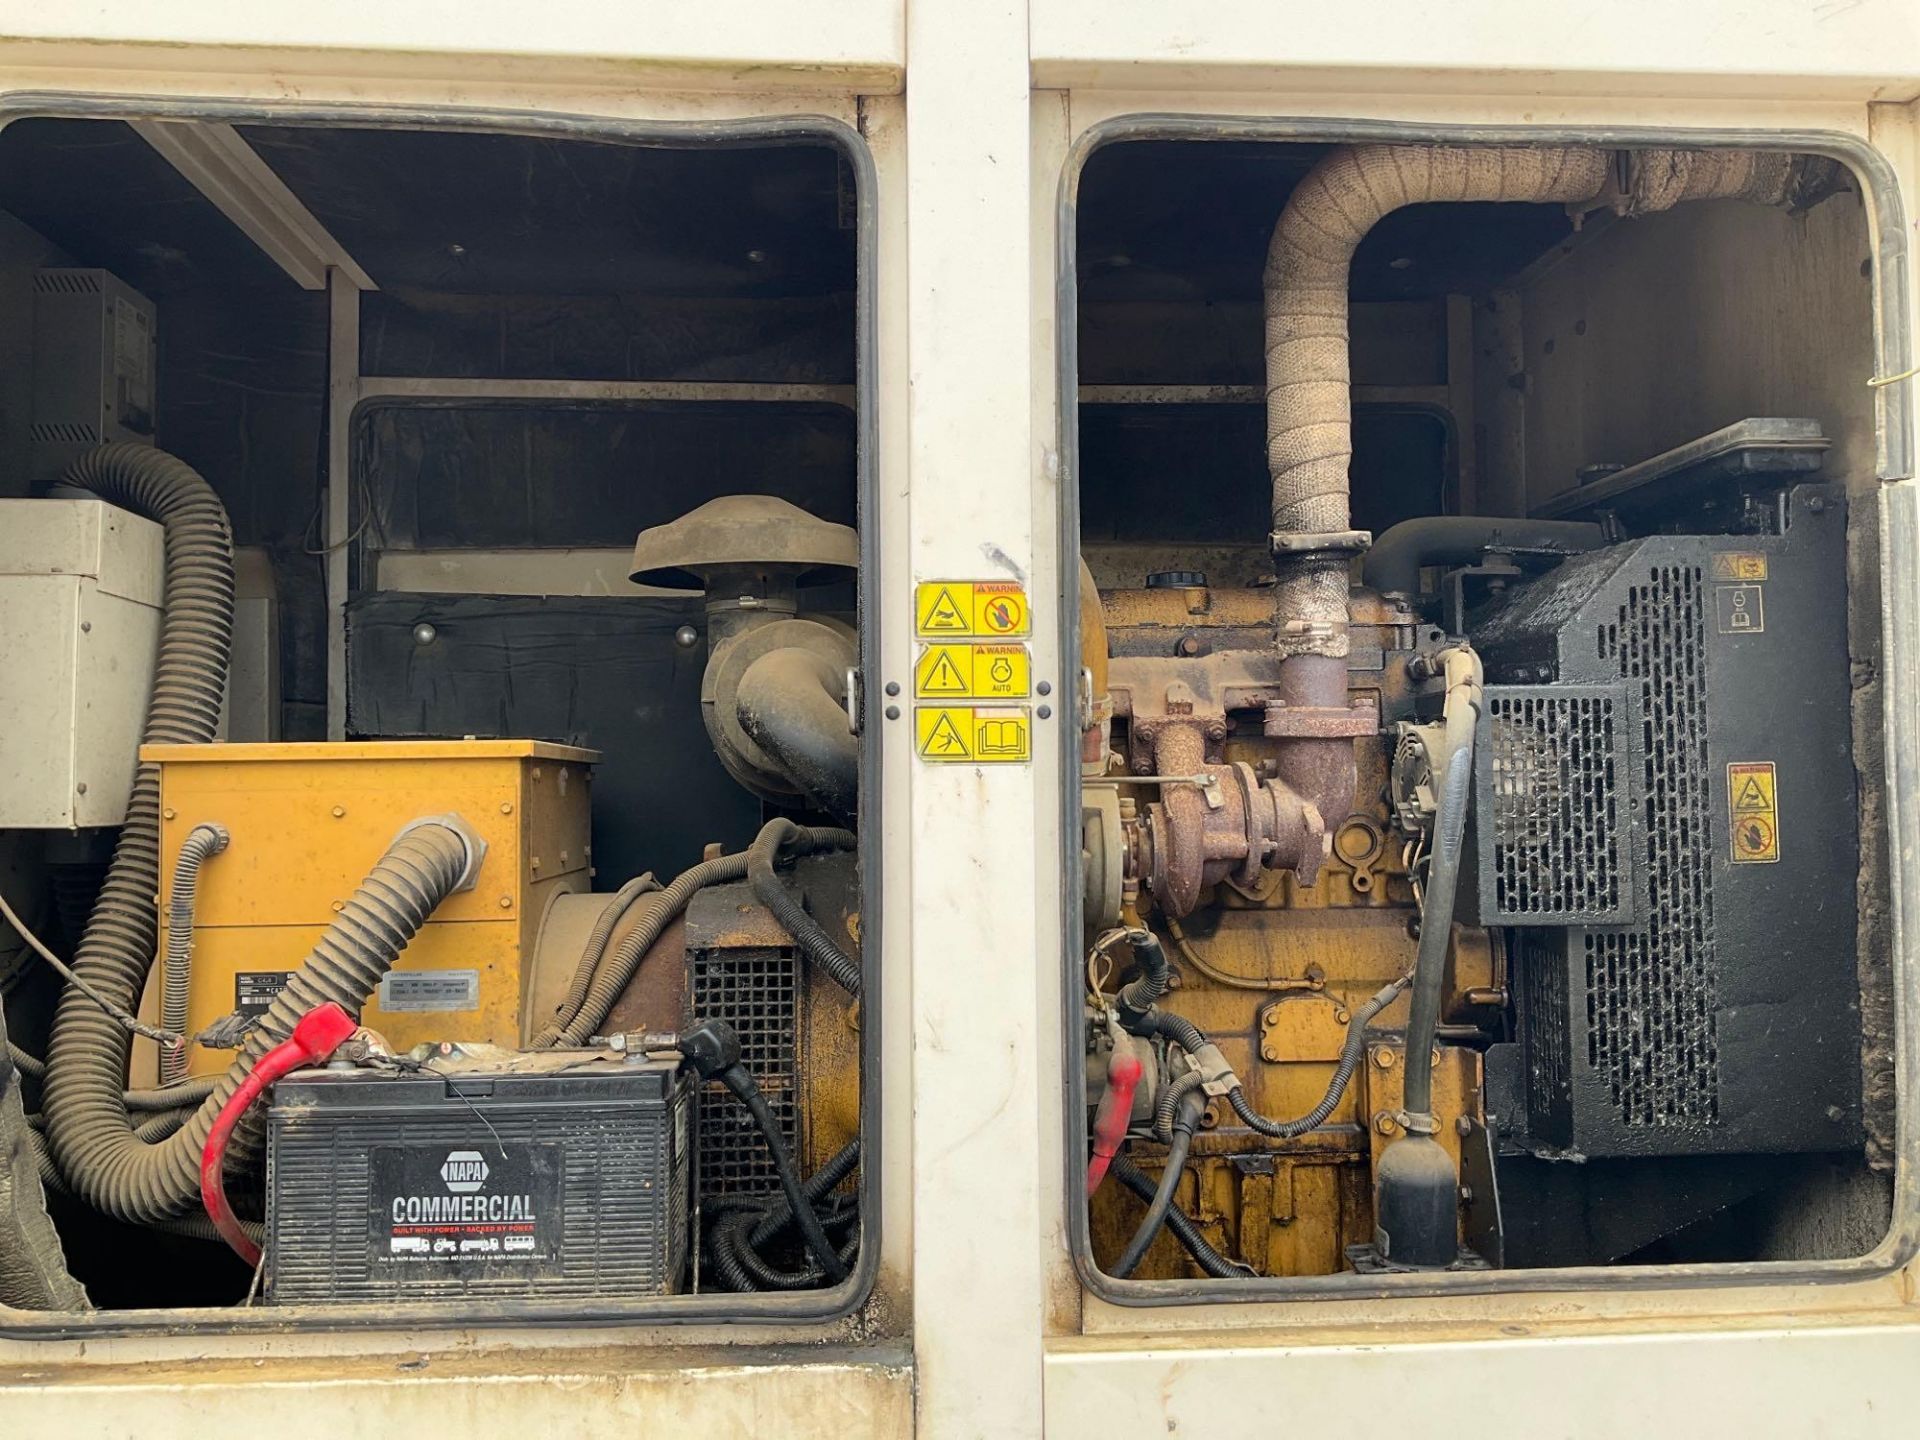 CATERPILLAR GENERATOR MODEL XQ60-4, DIESEL, PERKINS ENGINE, APPROX PHASE 3, APPROX RATED STAND BY PO - Image 21 of 28